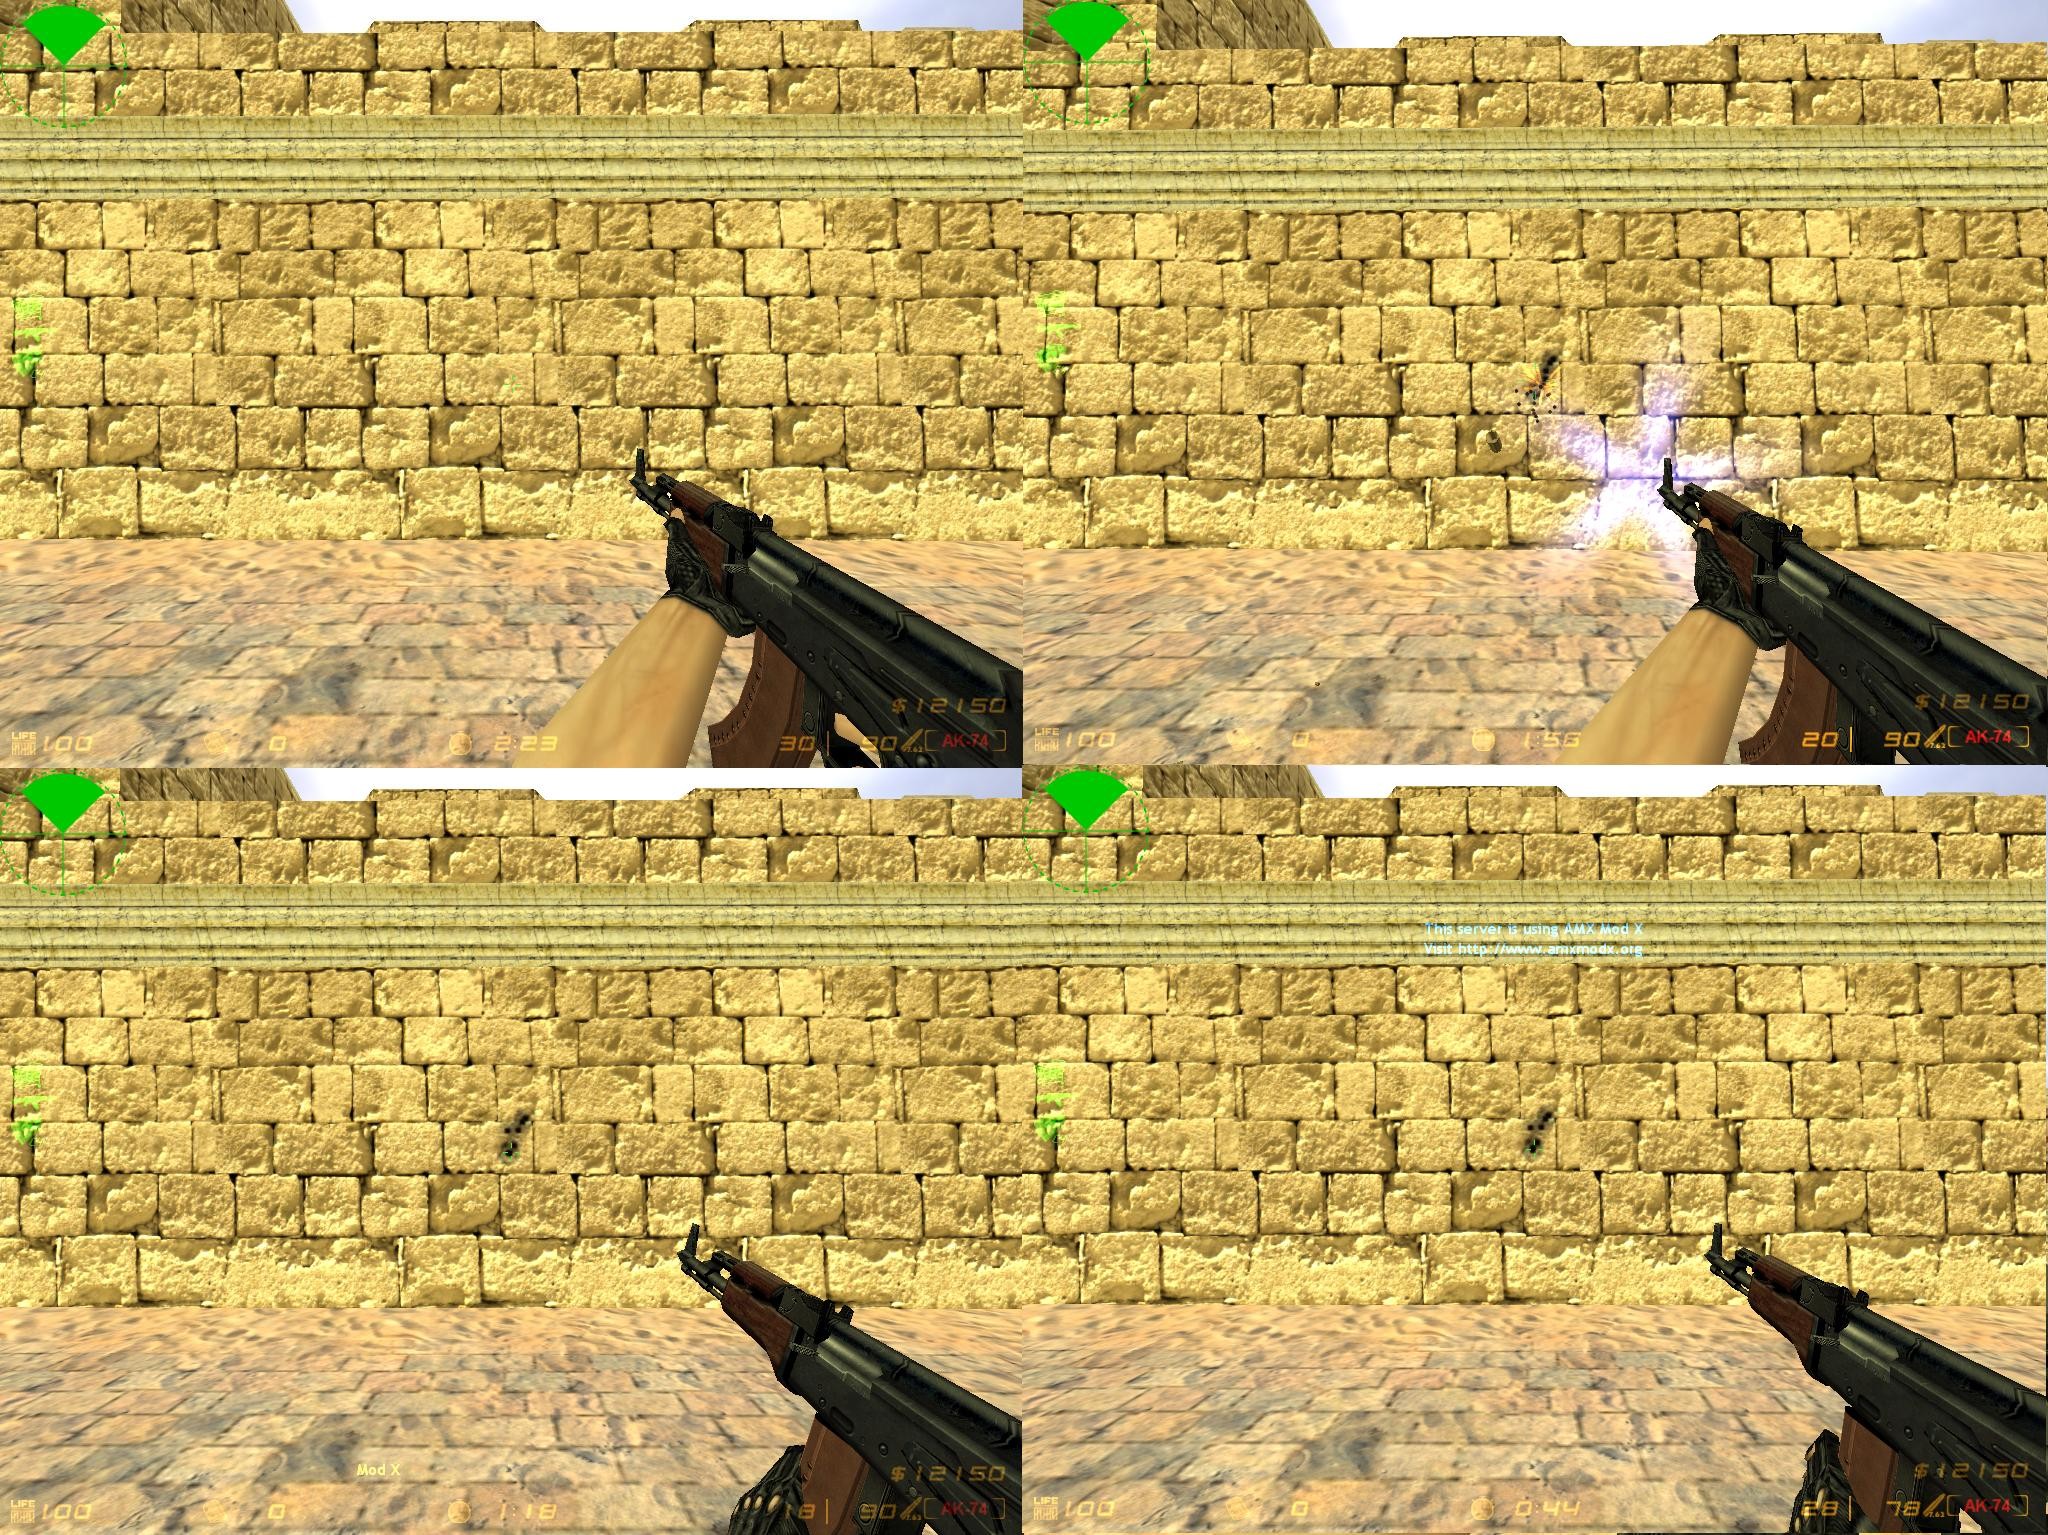 Ultimate Revive [Counter-Strike 1.6] [Modding Tools]